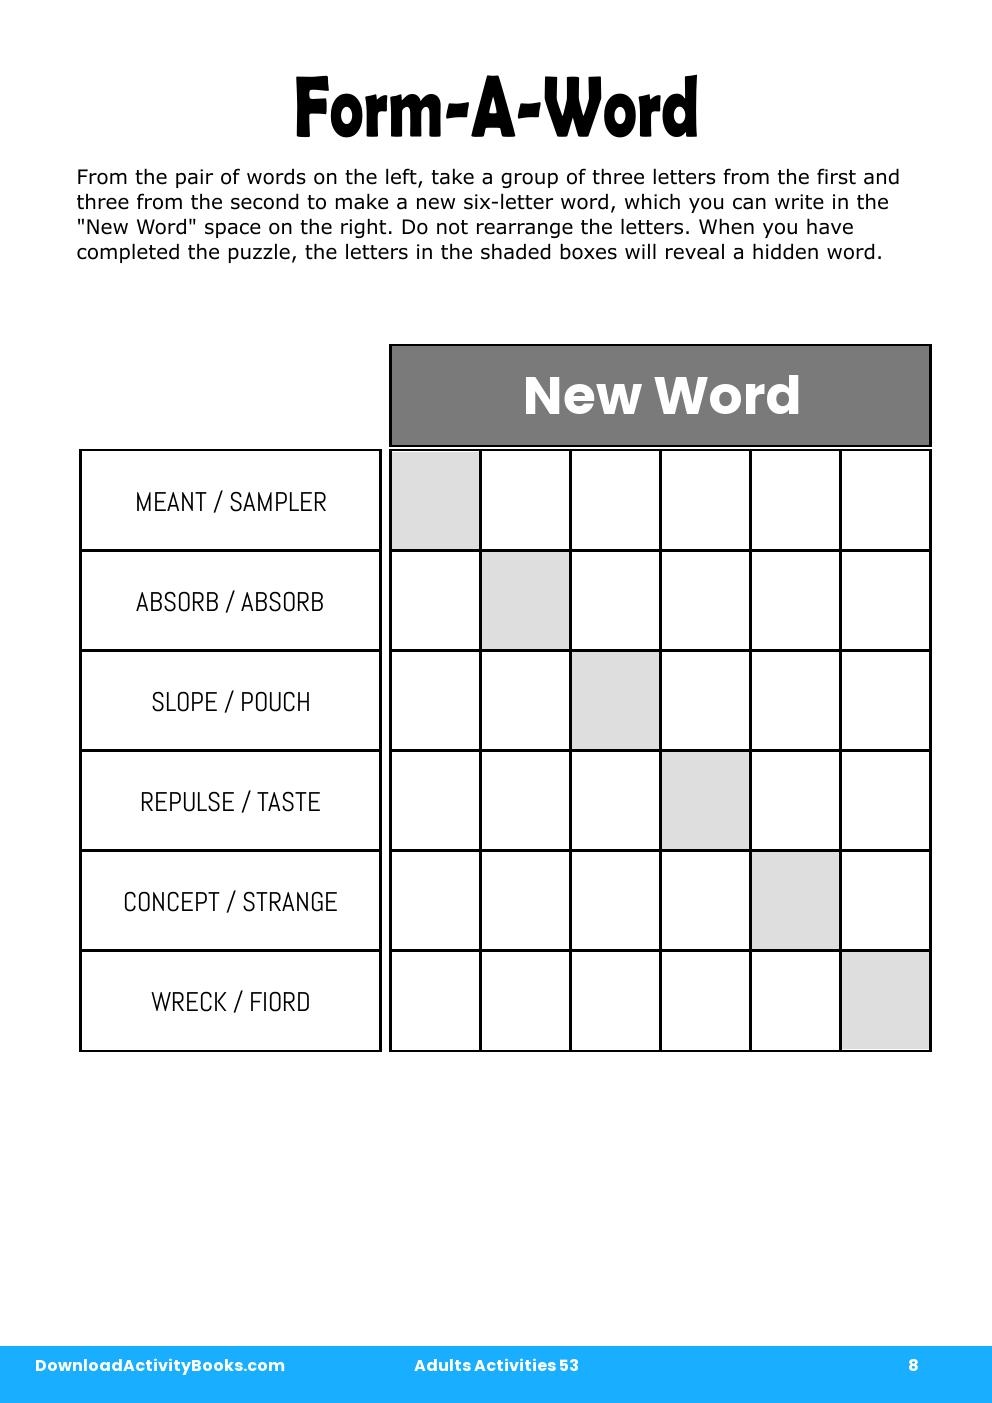 Form-A-Word in Adults Activities 53